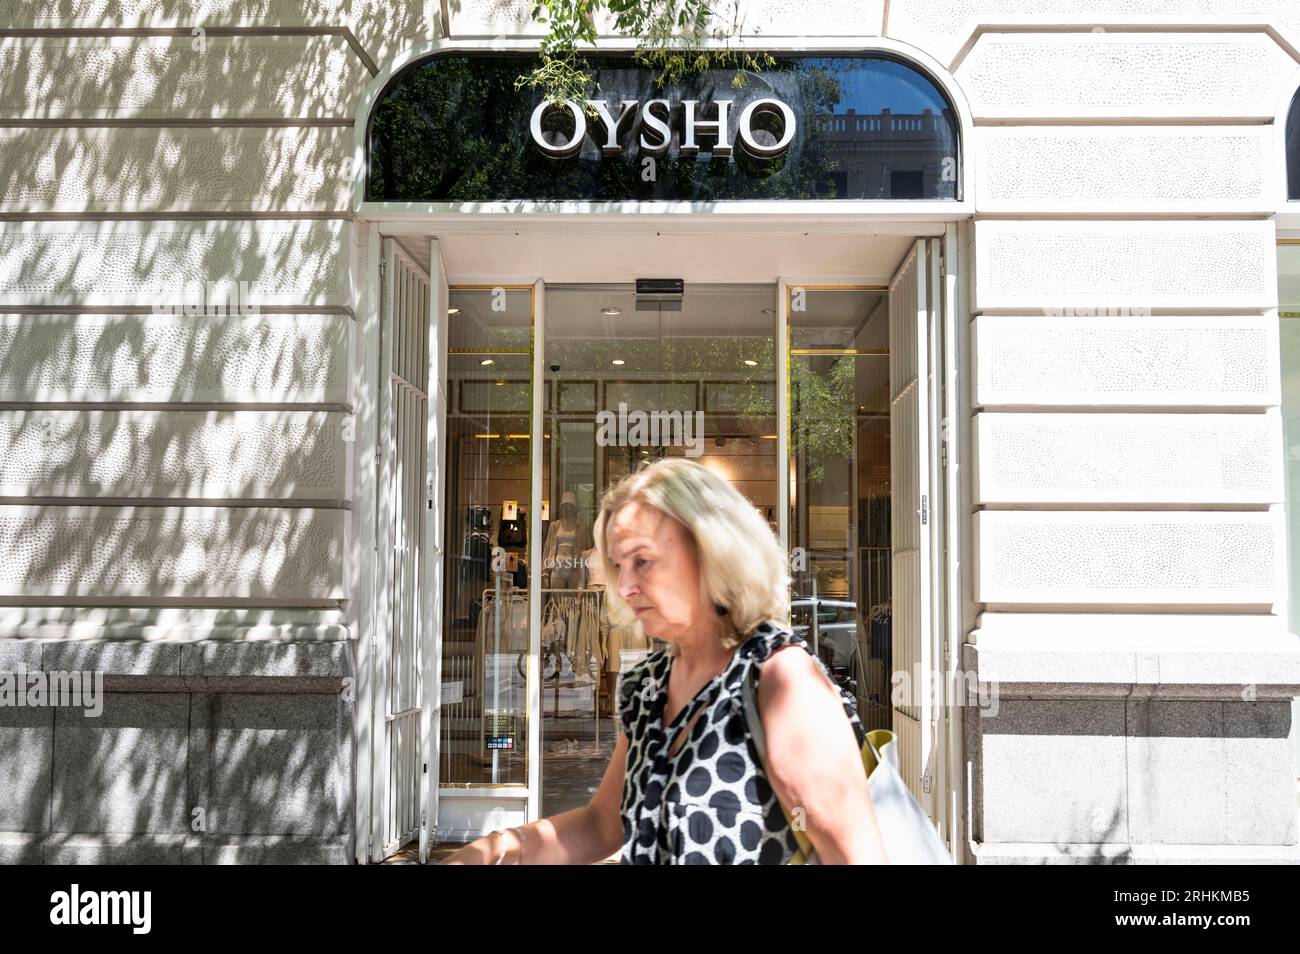 Oysho opens online shop in the US